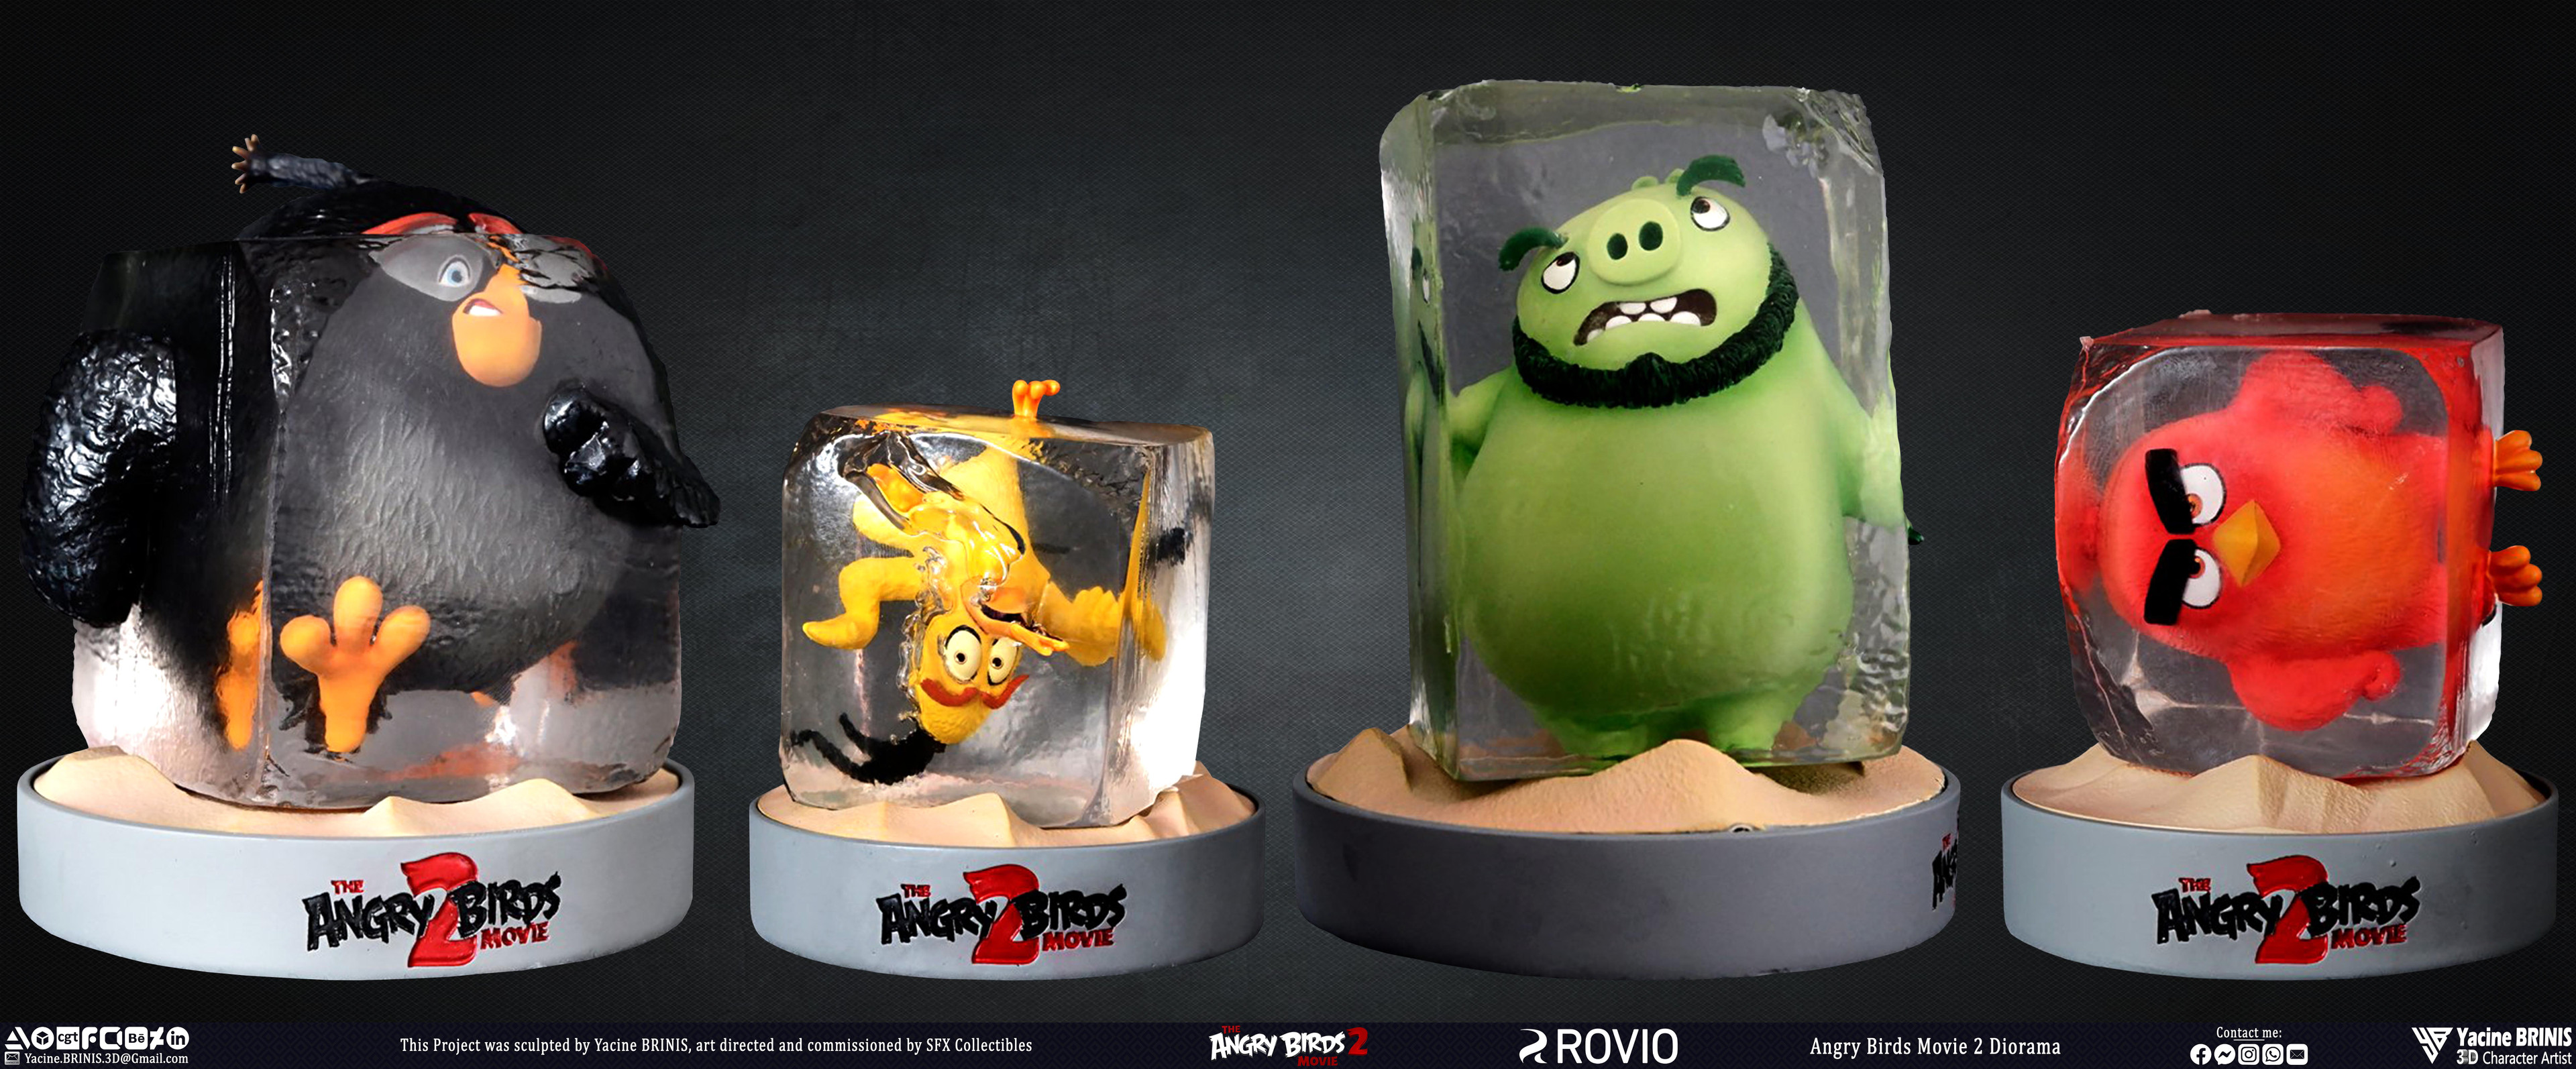 Angry Birds Movie 2 Rovio Entertainment Sculpted by Yacine BRINIS 002 Bomb, Chuck, Leonard, and Red Printed by SFX Collectibles